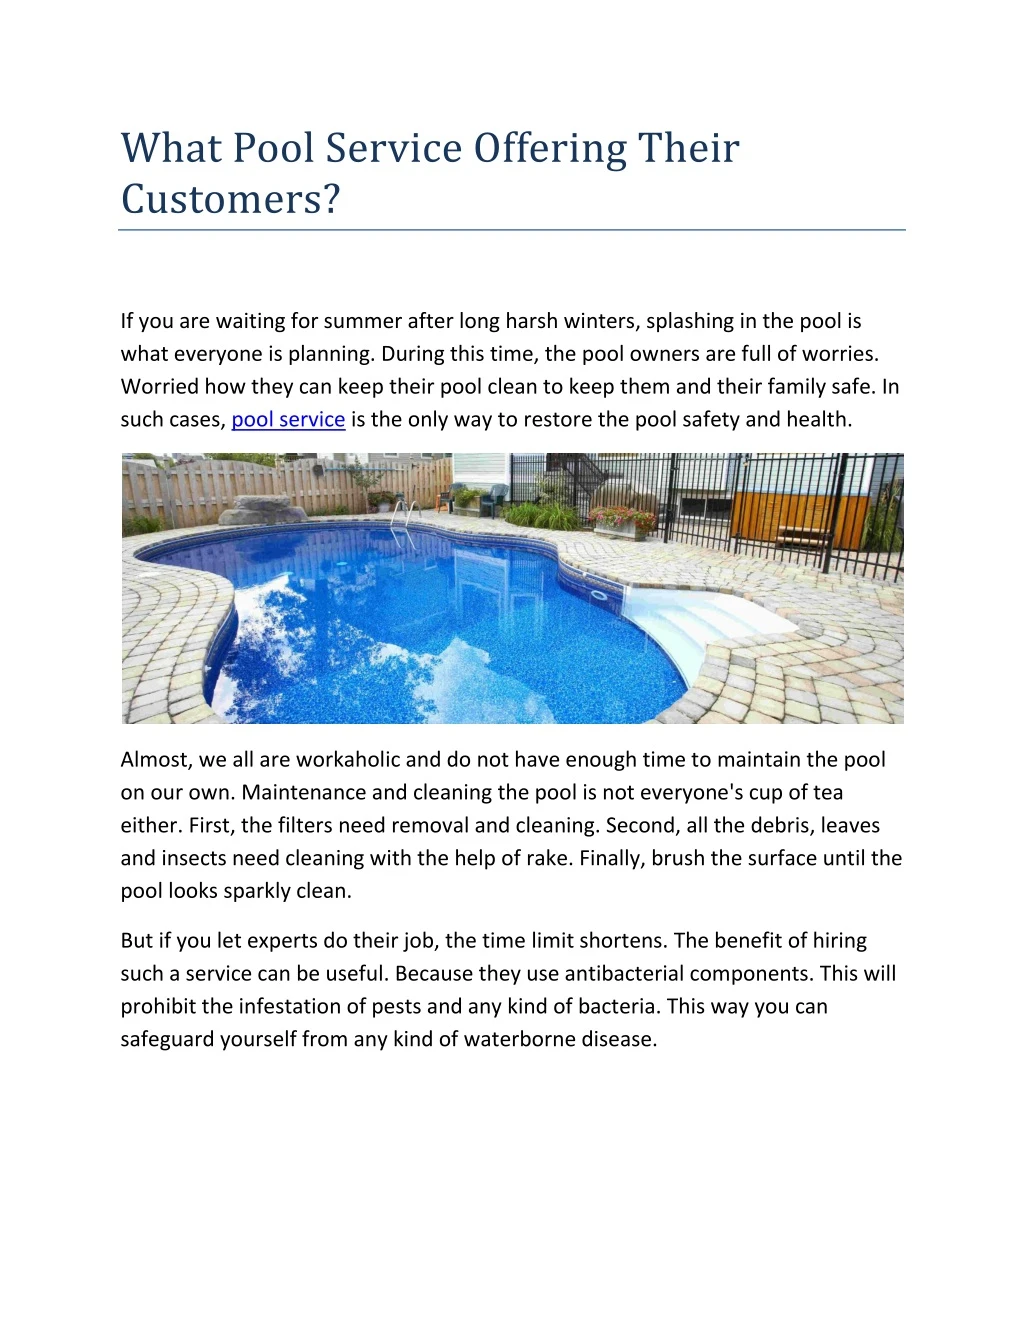 what pool service offering their customers